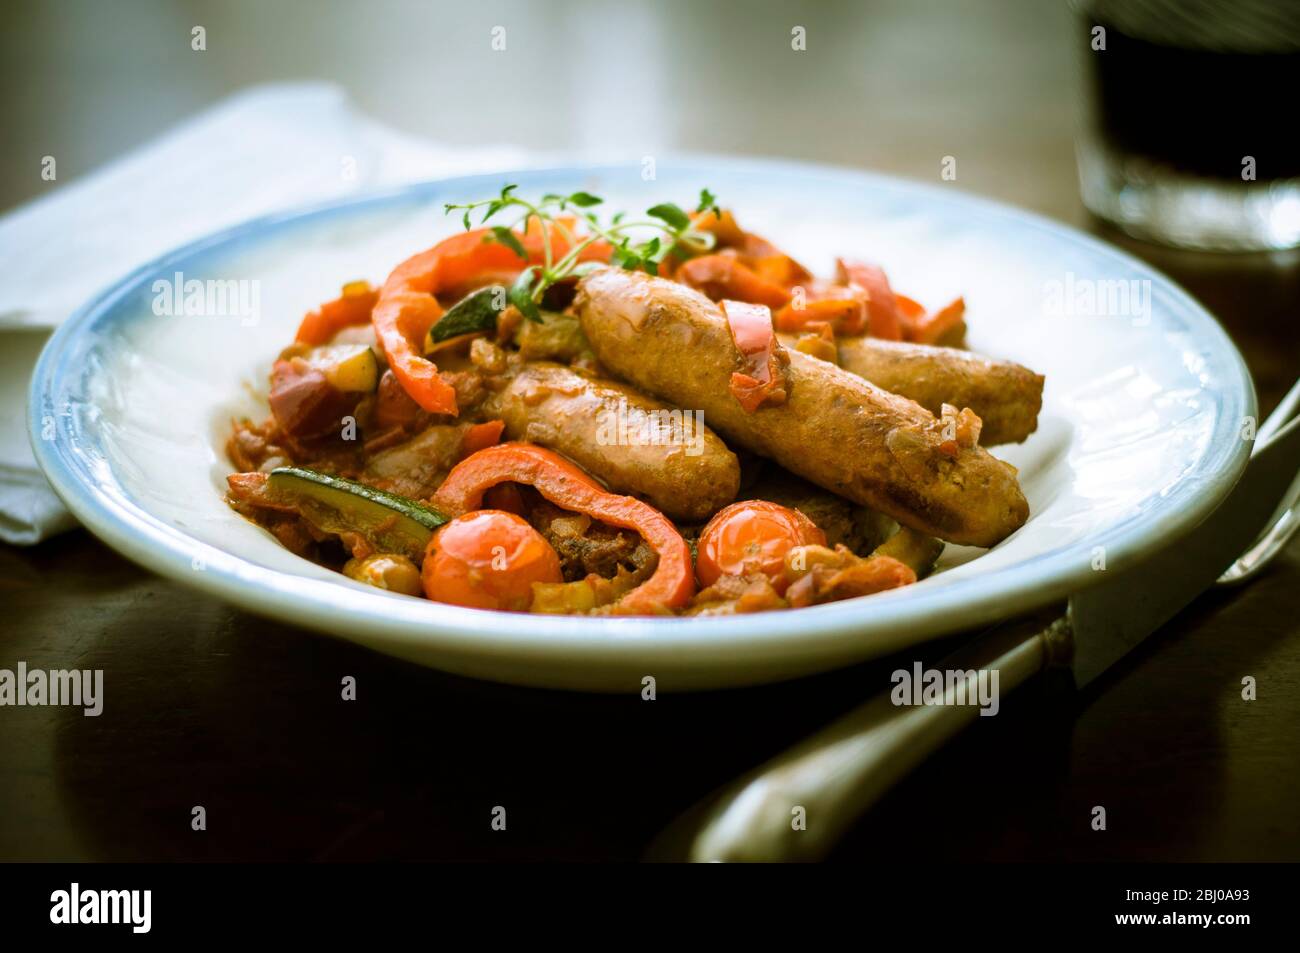 Spanish style dish of chorizo sausages with red peppers, tomatoes, courgettes and red wine sauce Stock Photo